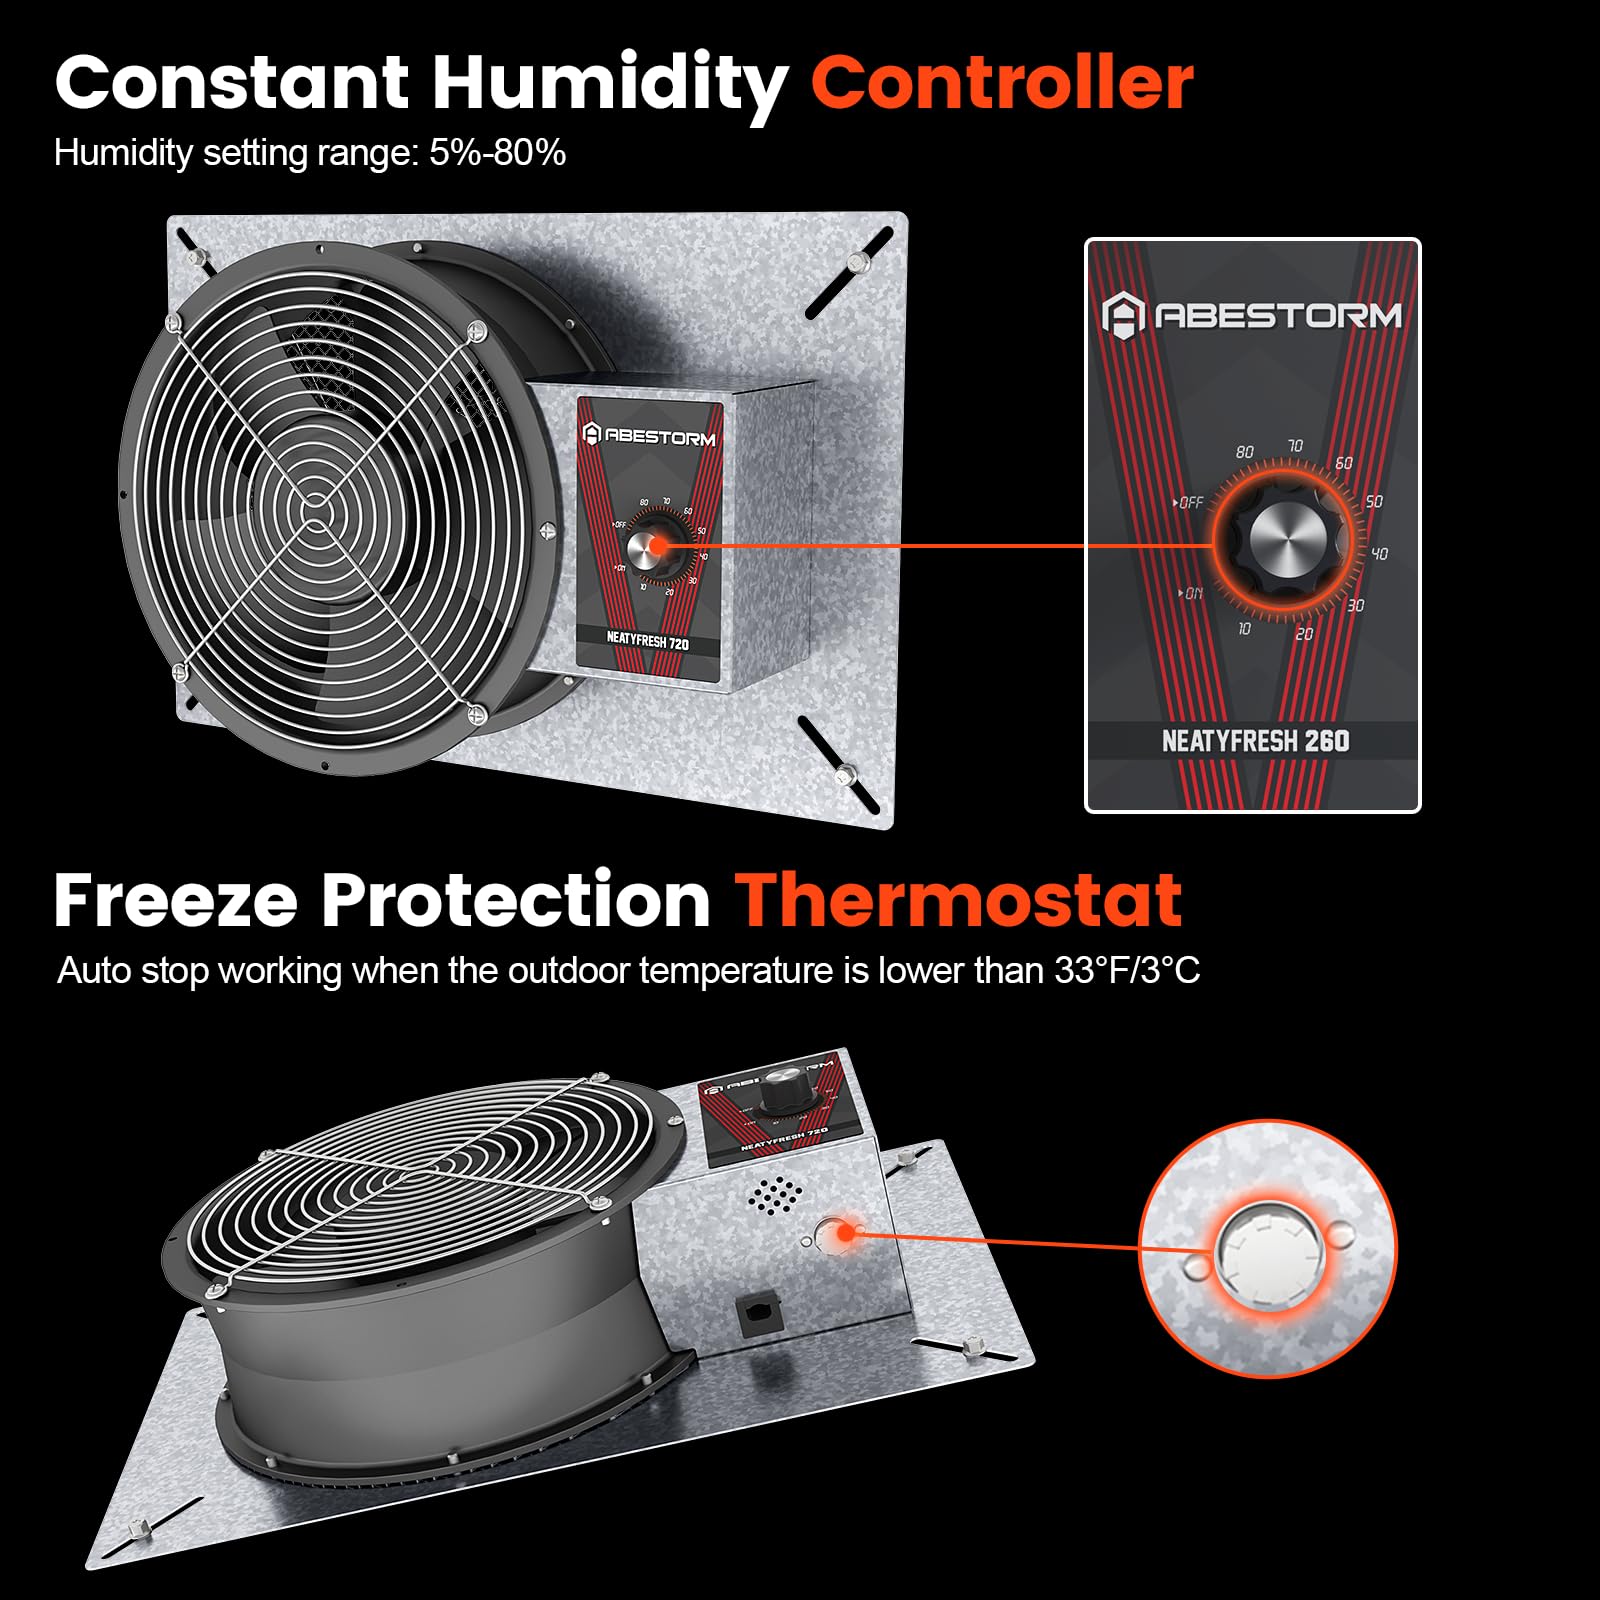 Abestorm 720CFM High Air Flow Crawlspace Ventilation Fan, IP55 Rated 10" Vent Fan with Humidistat & Freeze Protection Thermostat for Crawl Space, Basement, Garage, Attic with Isolation Mesh